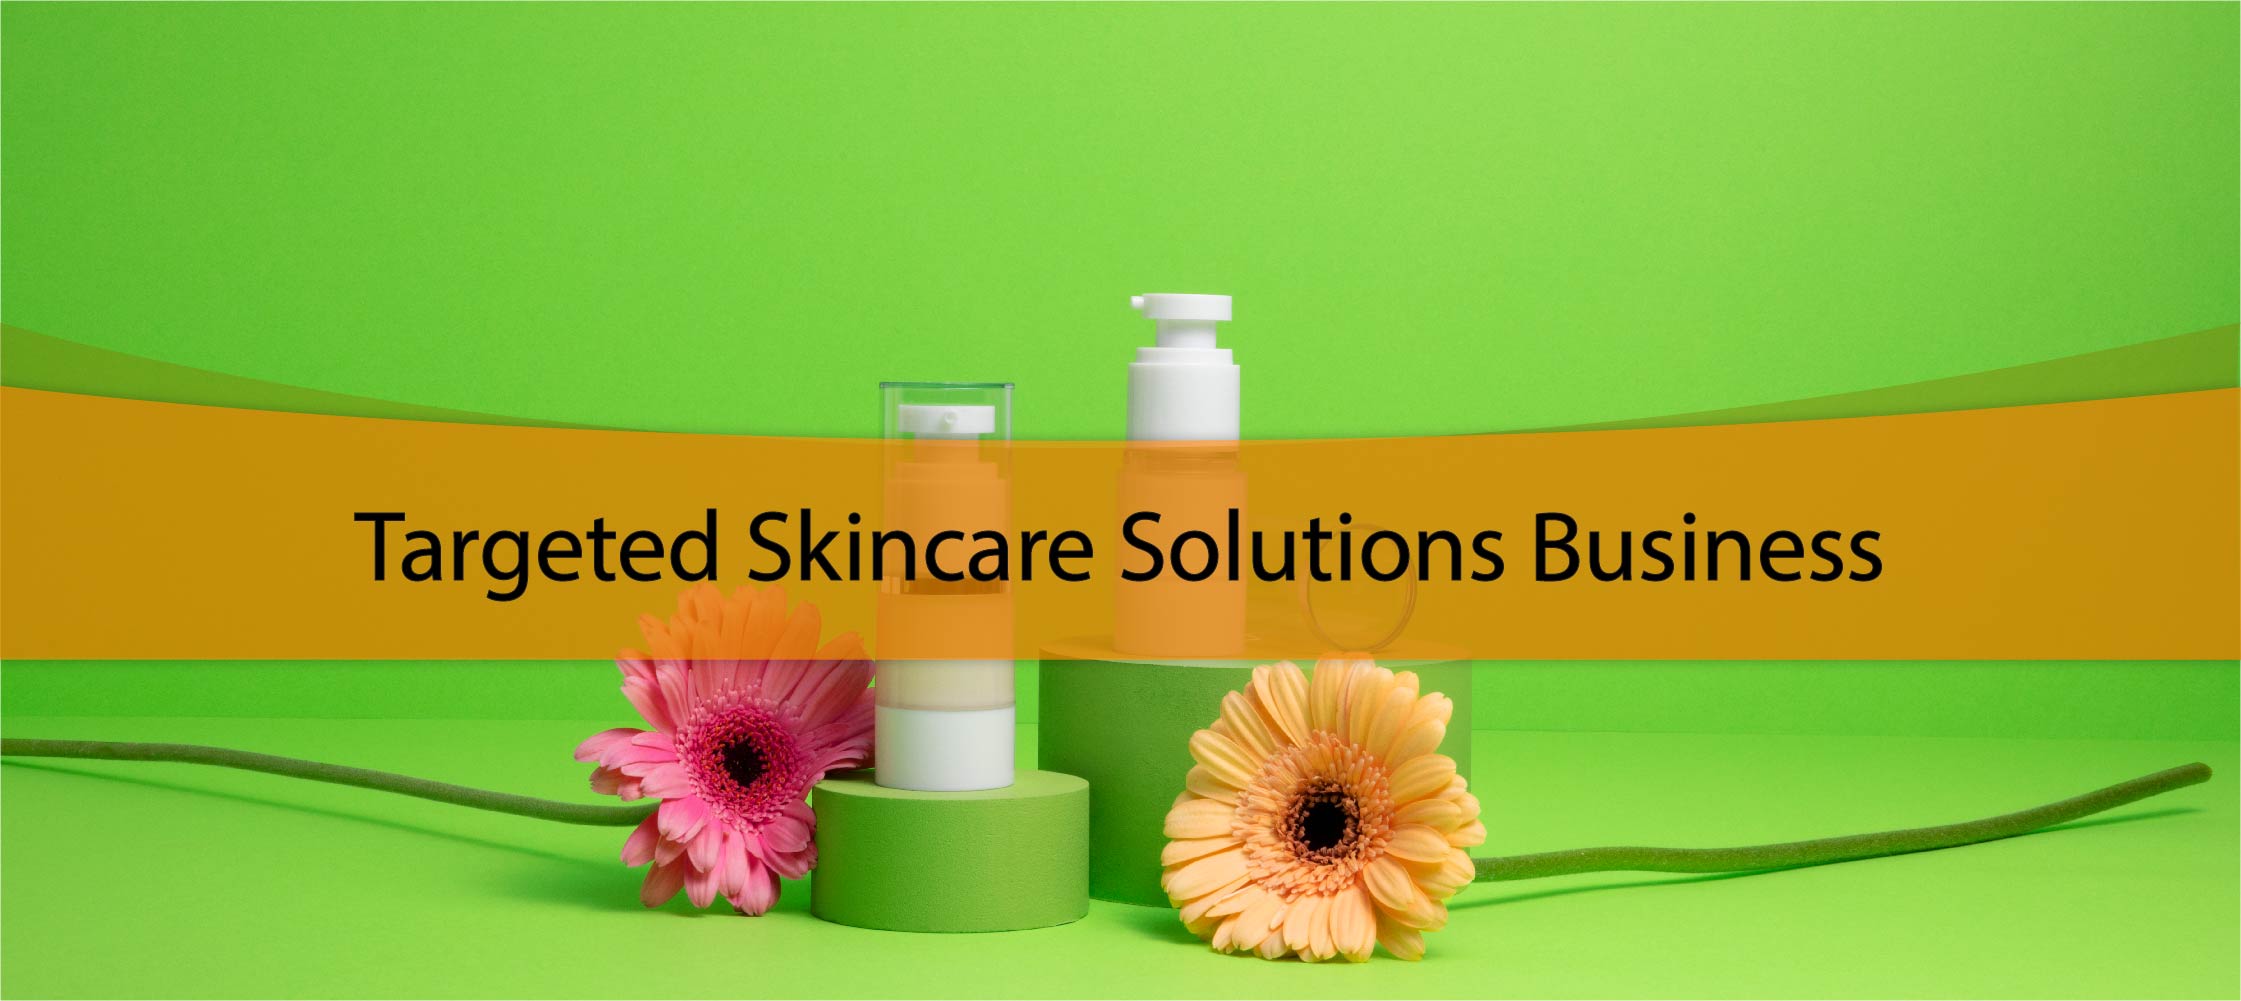 Targeted Skincare Solutions Business